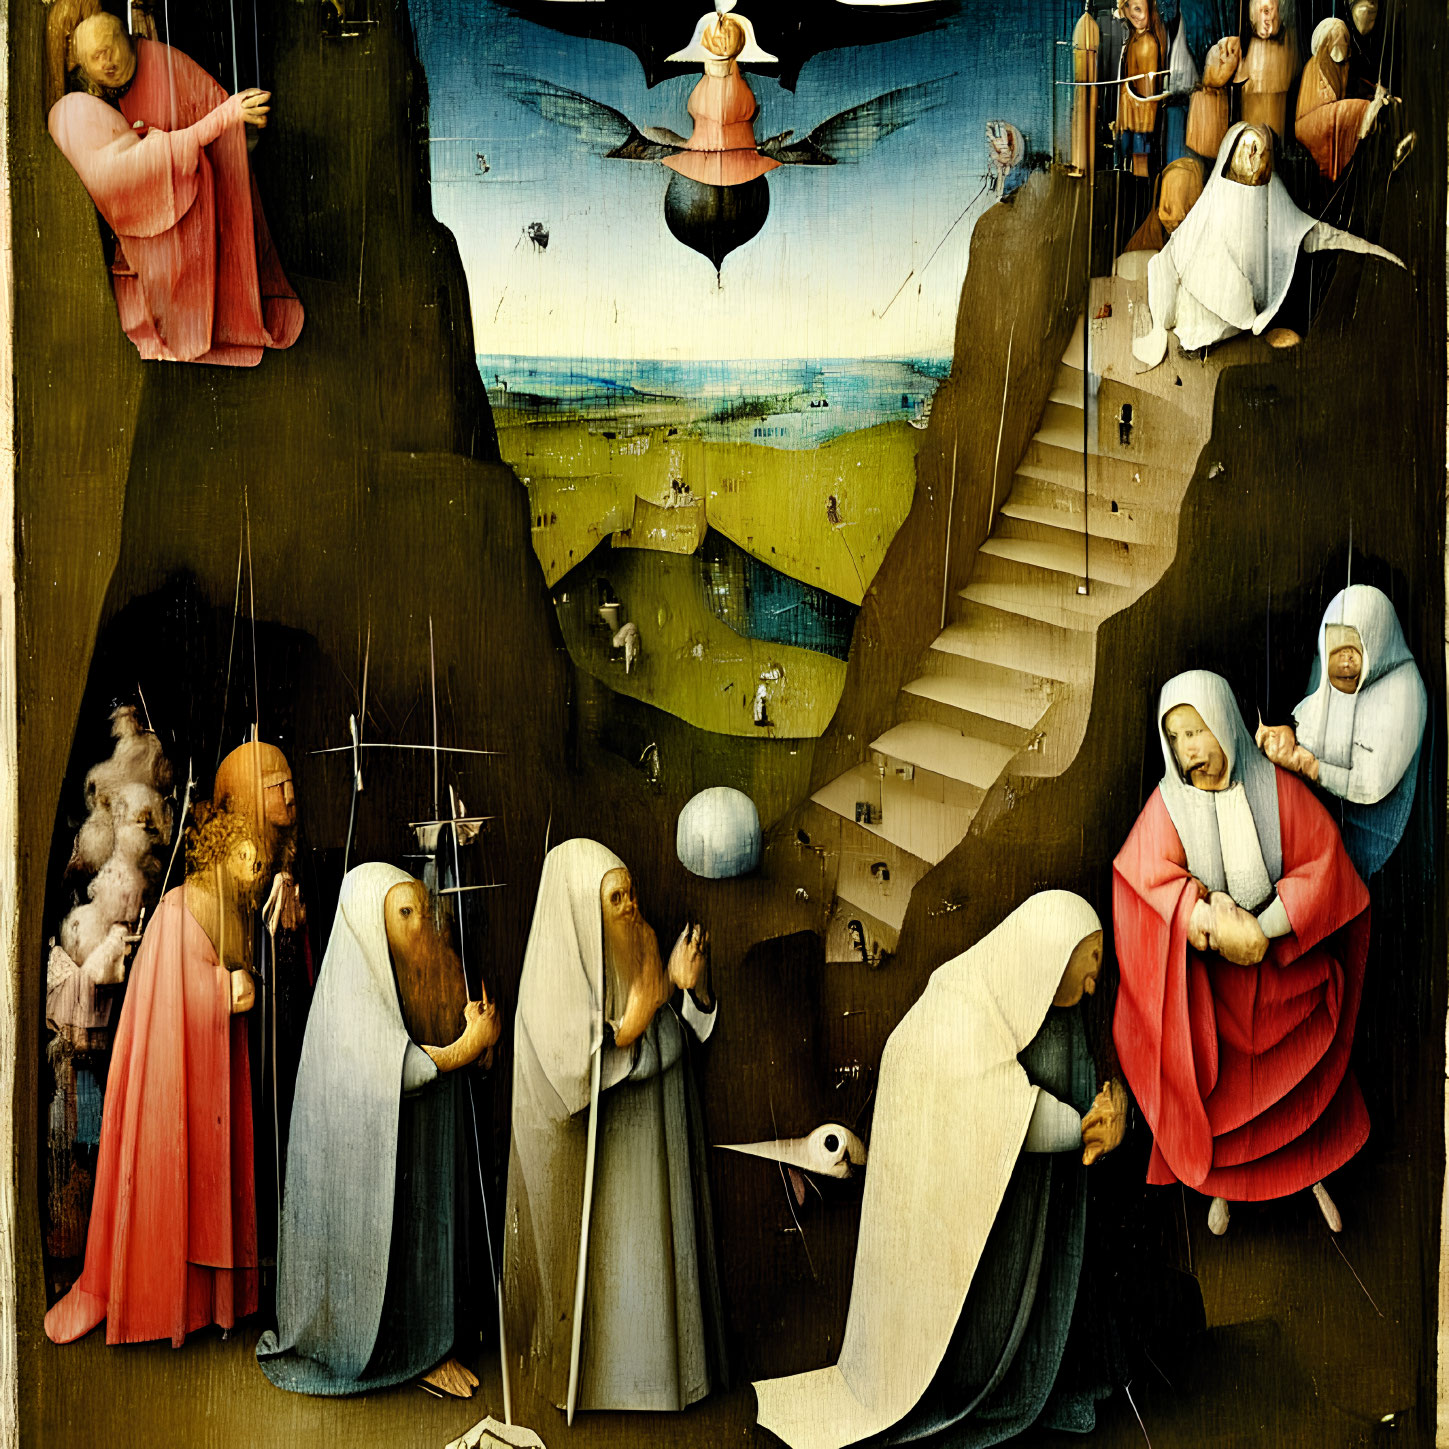 Religious Painting Featuring Biblical Scenes and Angelic Figures